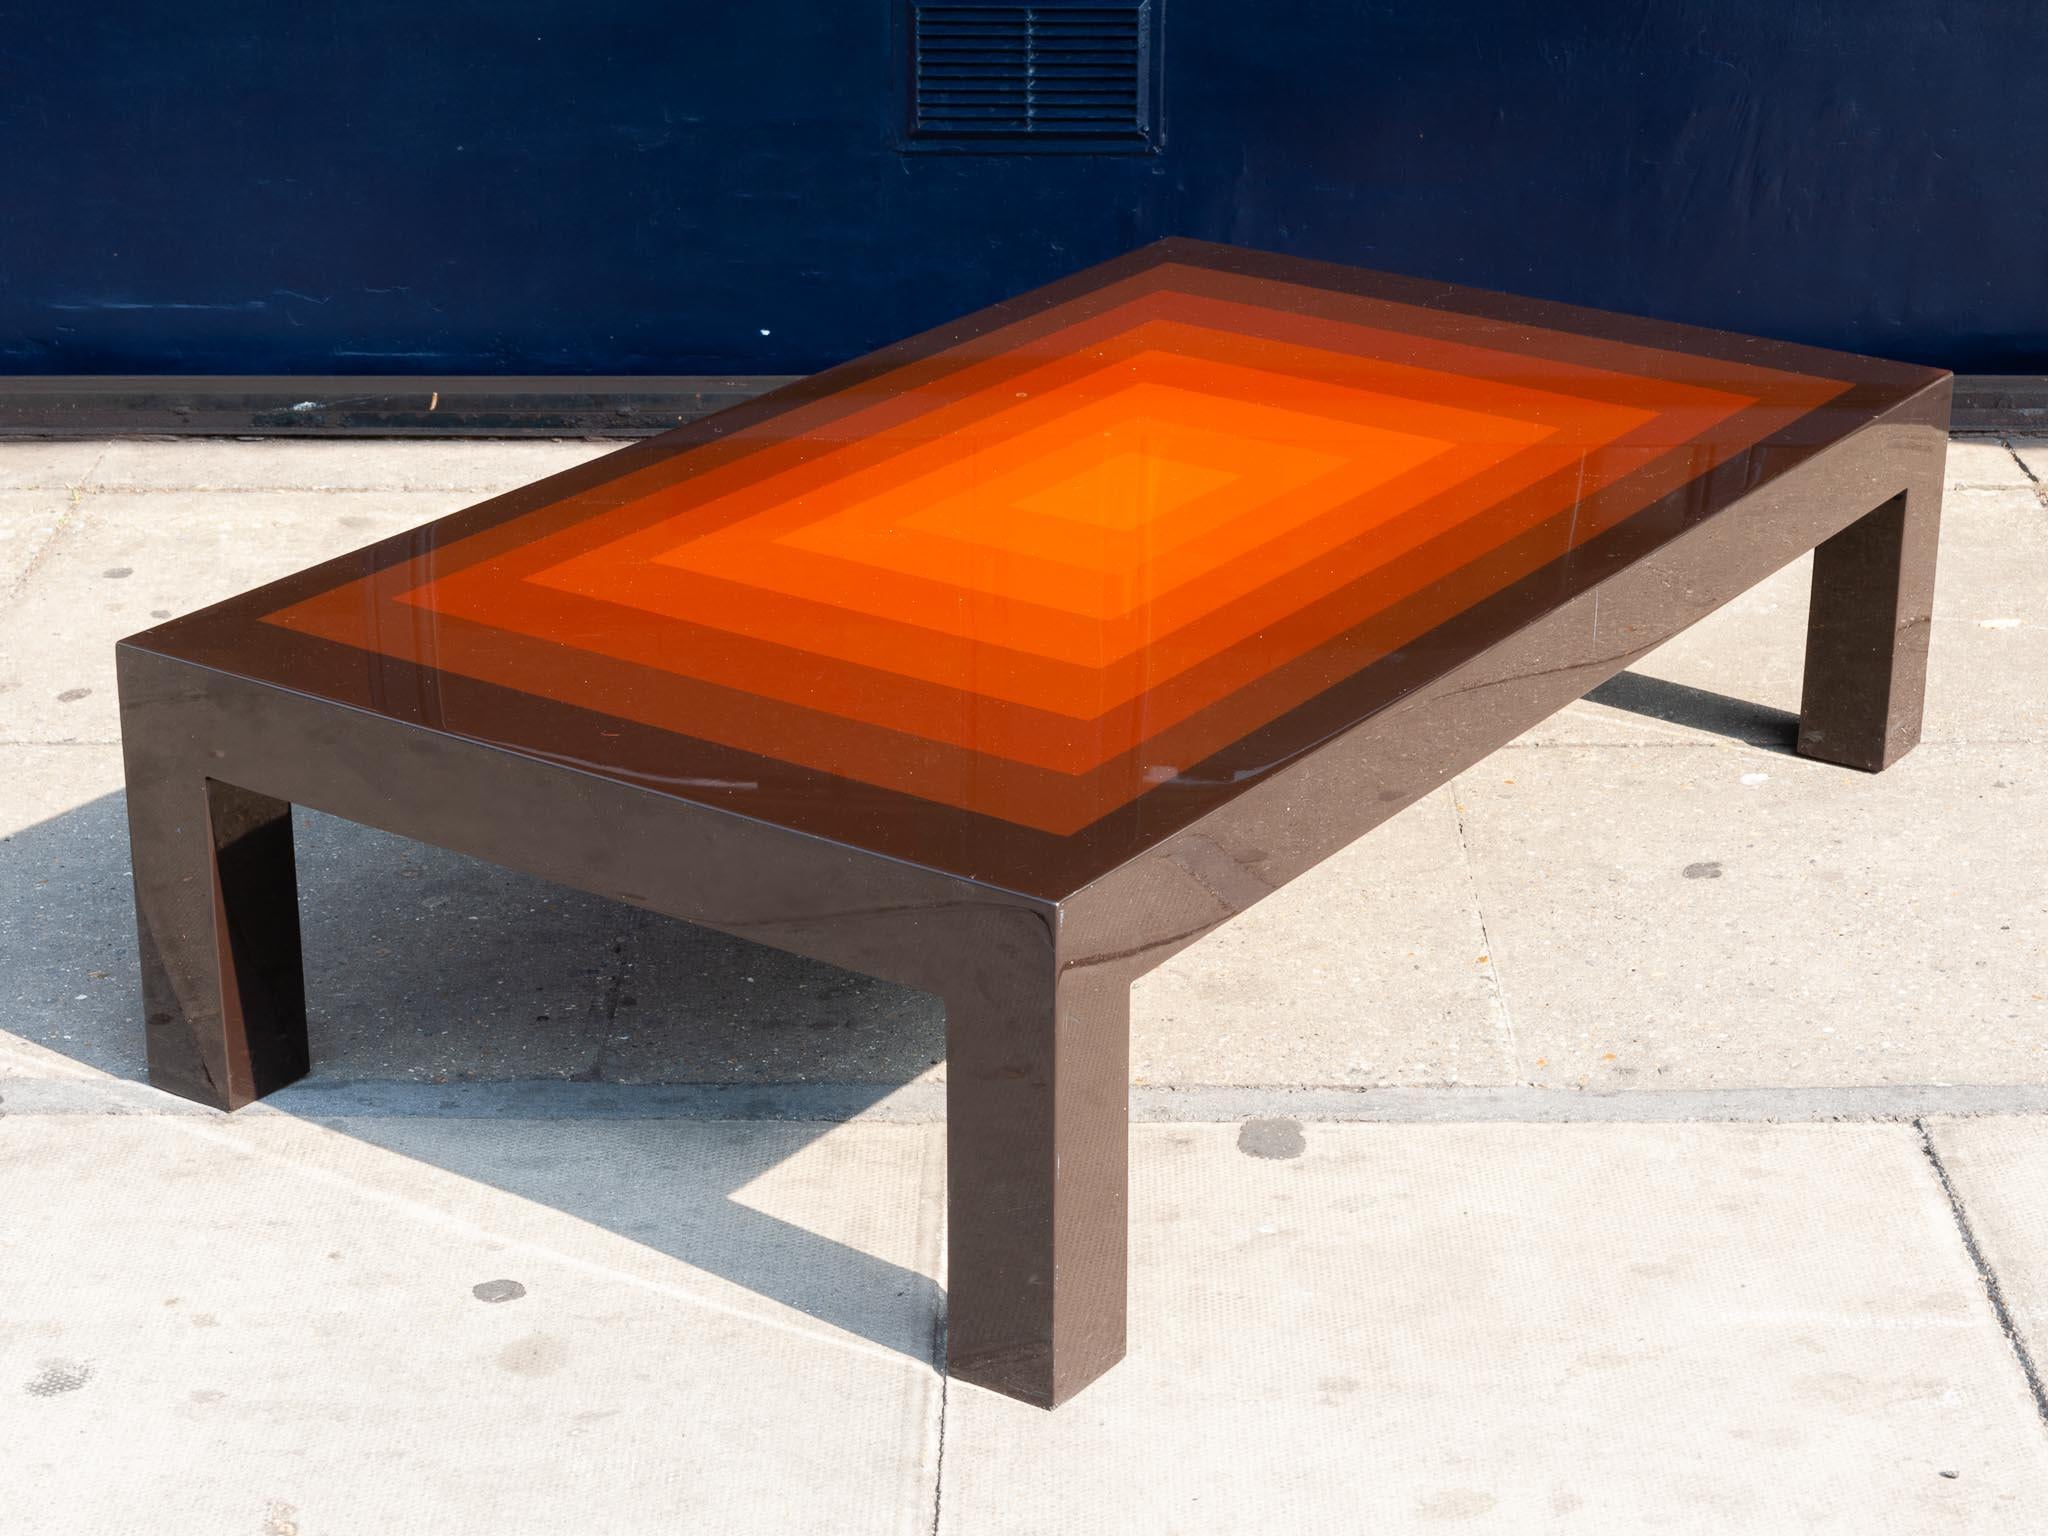 1970s rectangular multi-colored brown, red and orange high gloss low coffee table. An interesting coffee table with an added colorful wow factor of brightly colored rectangles increasing in brightness as they get smaller towards the centre. Some